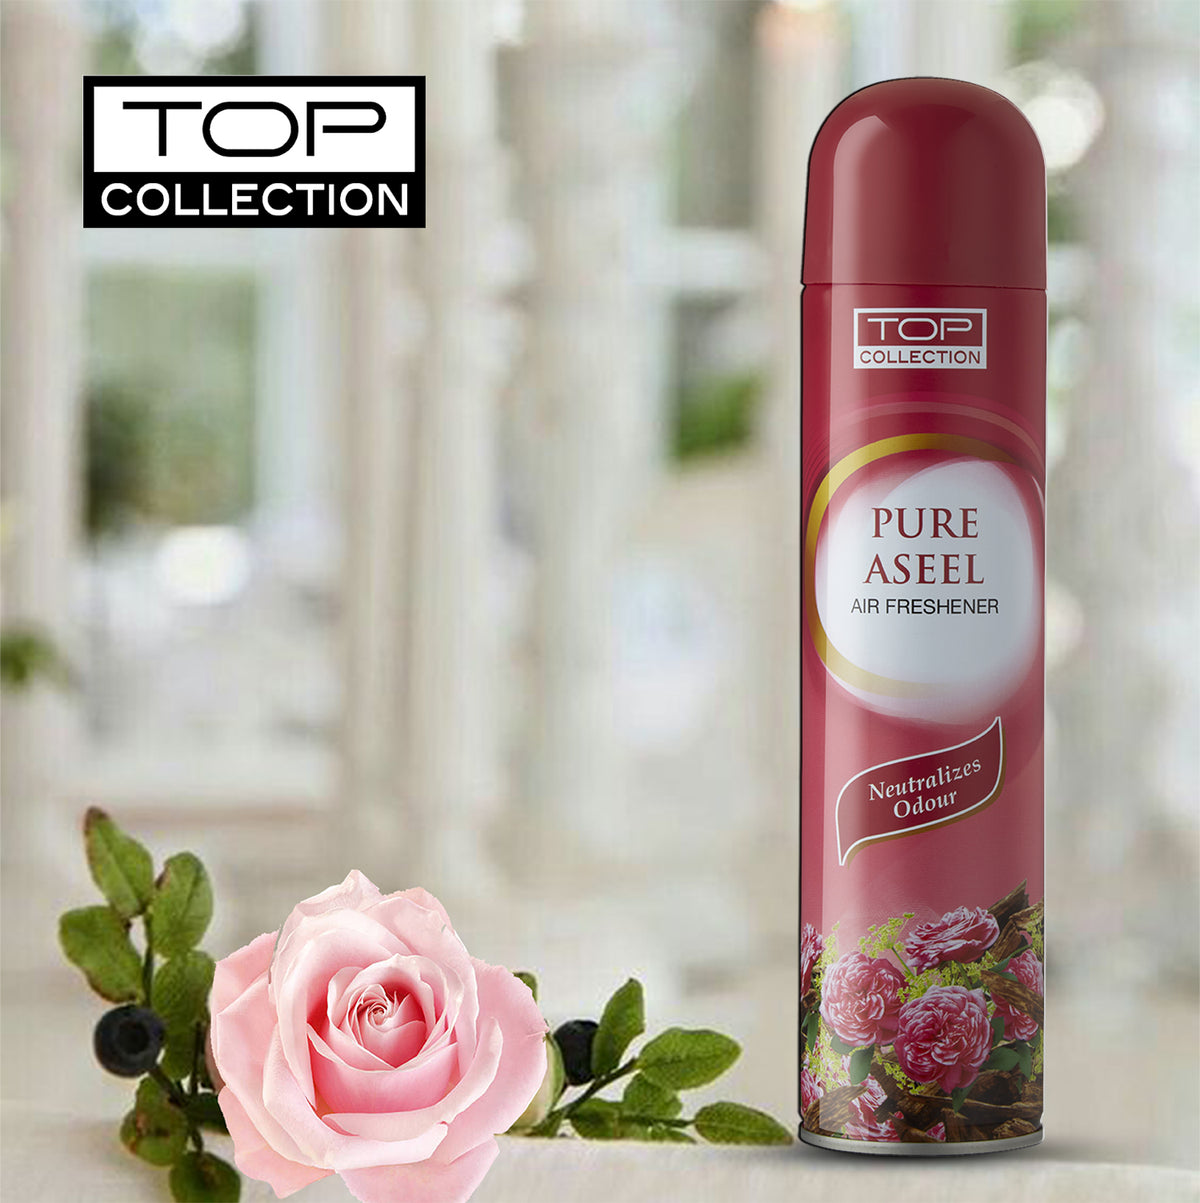 Top Collection Air Freshener - Pure Aseel, 300ml